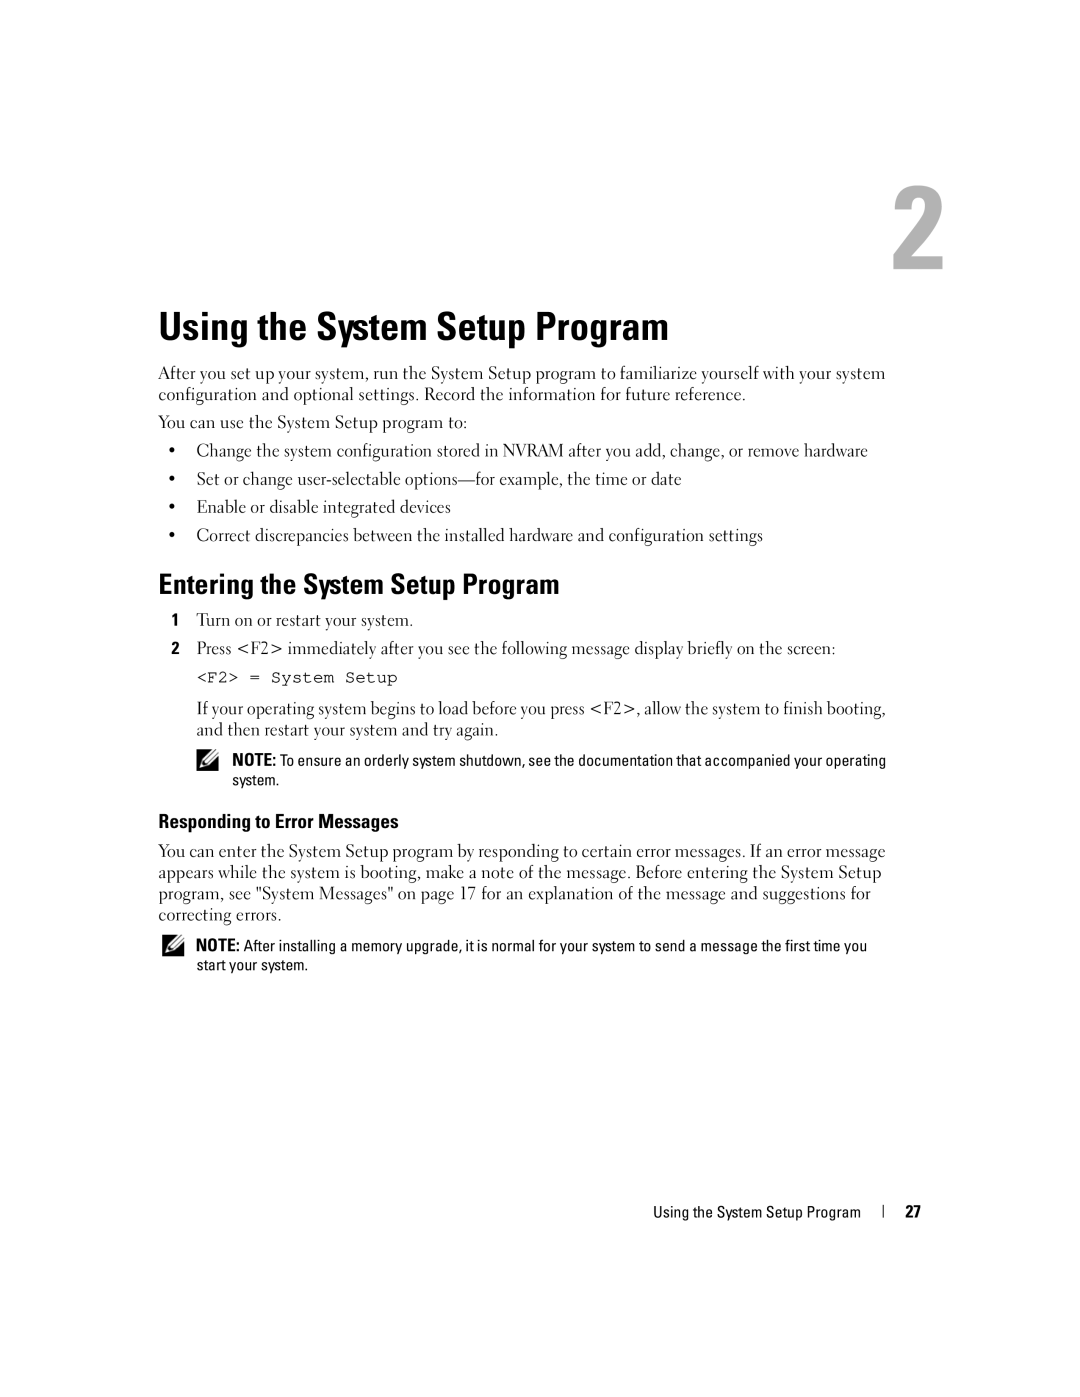 Dell SC1430 owner manual Entering the System Setup Program, Responding to Error Messages, Using the System Setup Program 